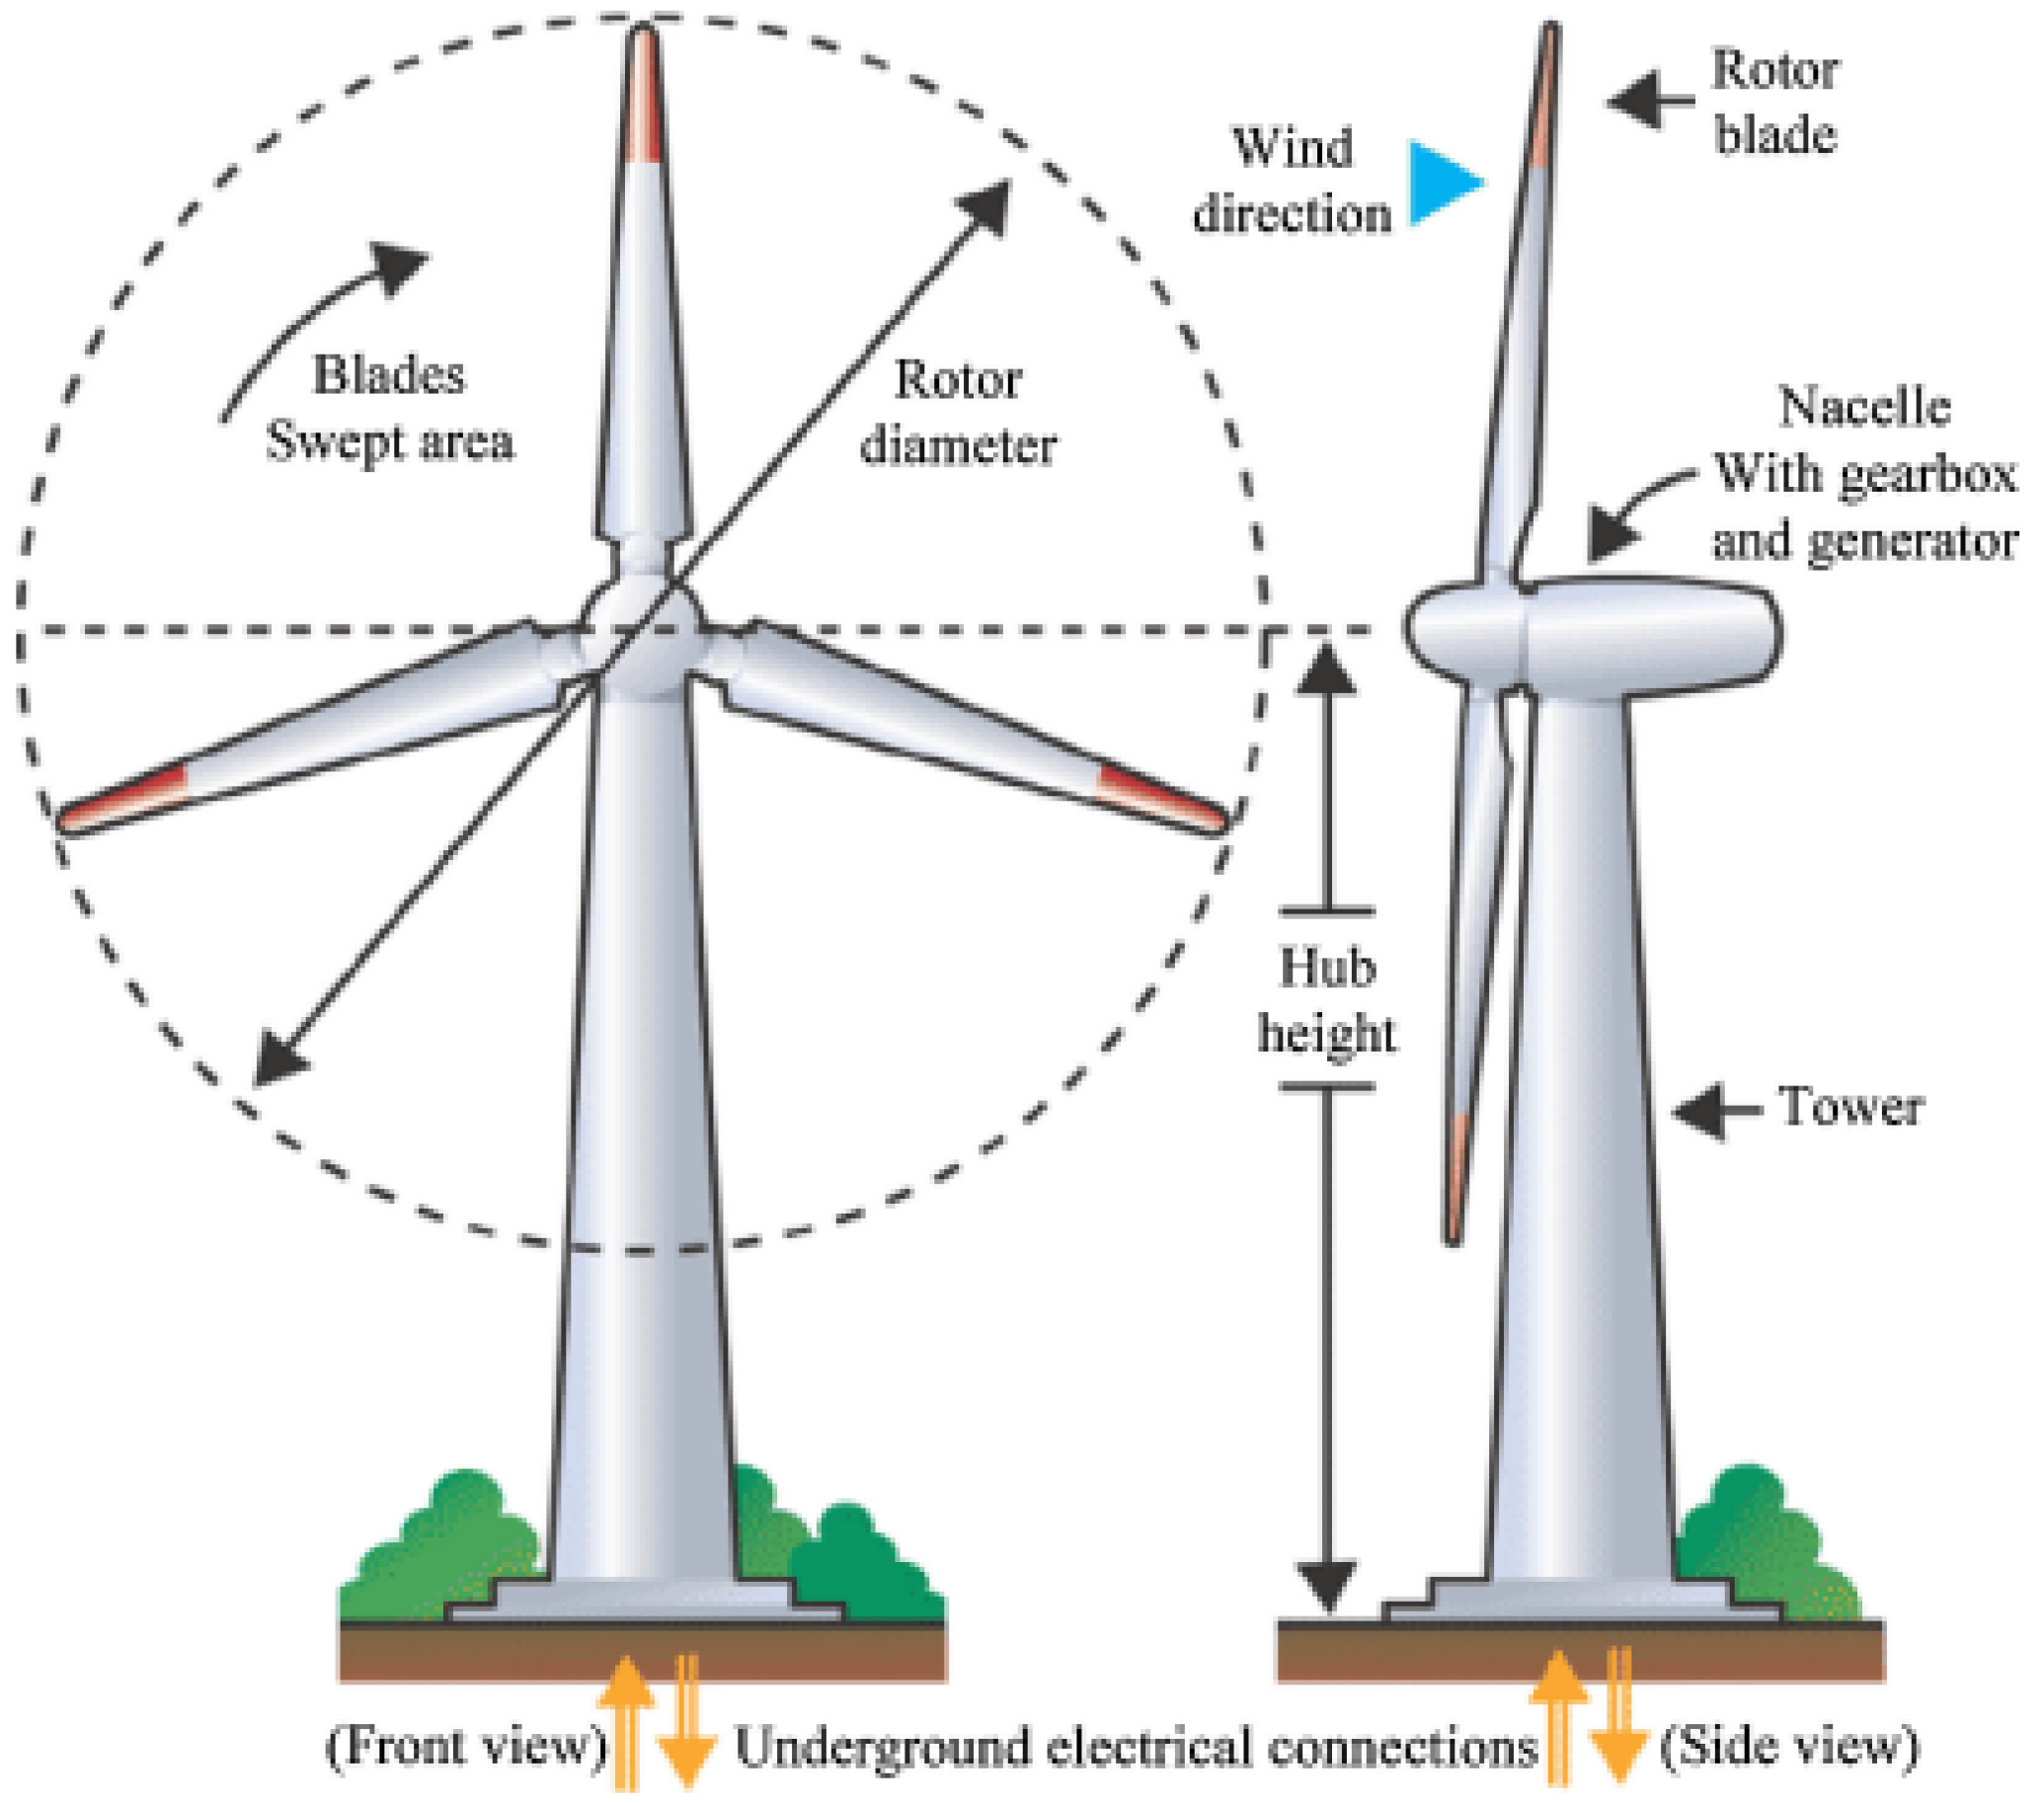 How chemists could give new life to old wind turbine blades